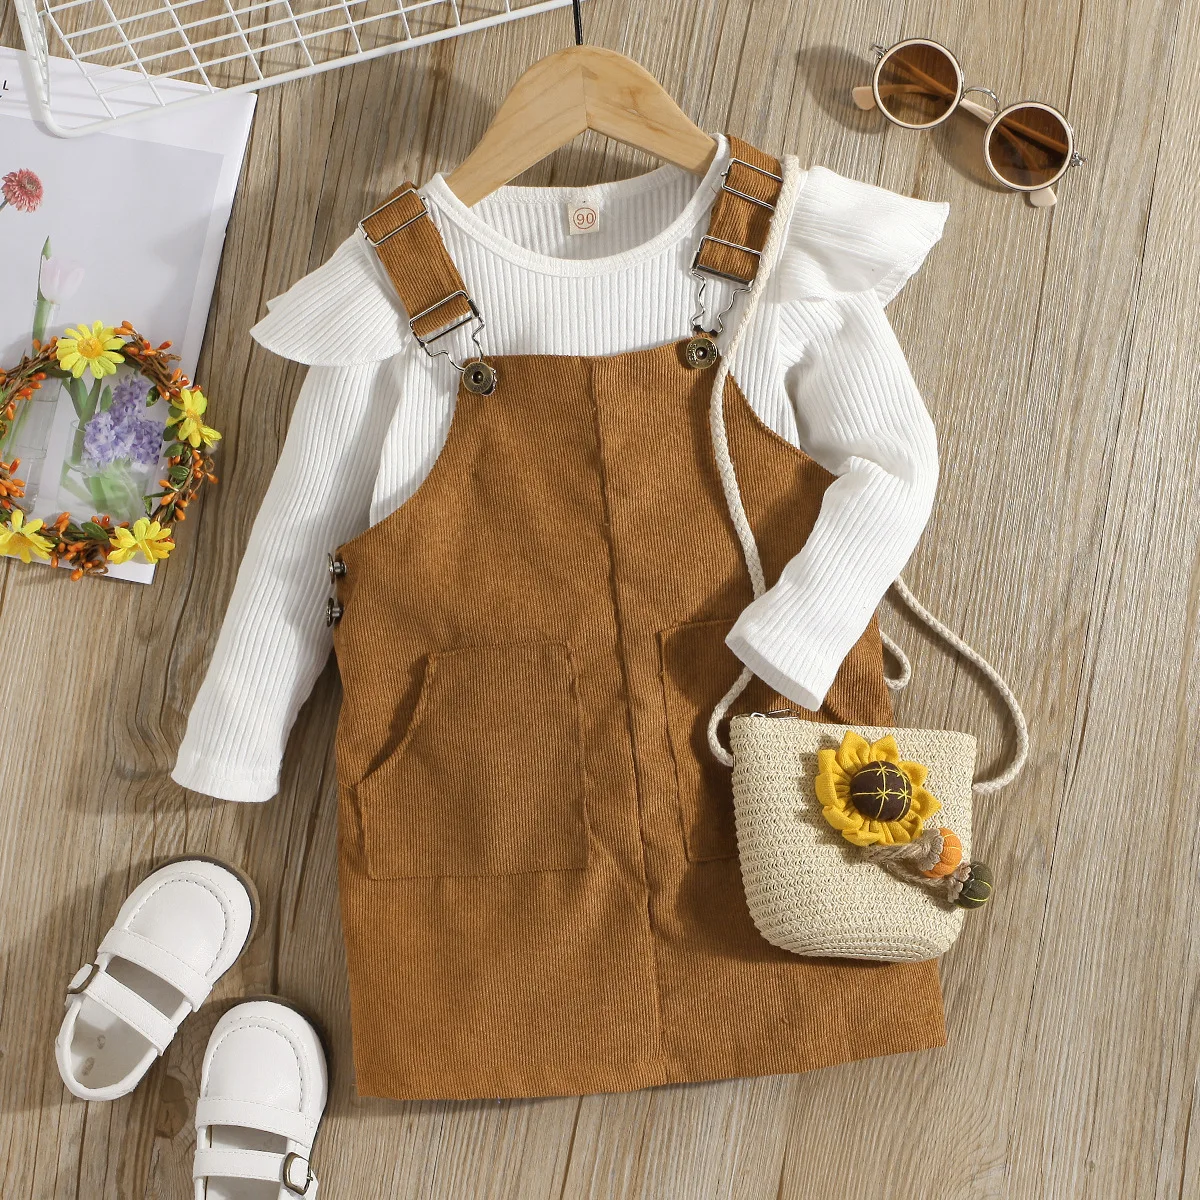 

Toddler Girls Clothing set Infant solid ruffles long sleeve rib shirt and sleeveless corduroy overalls skirt 2 pcs set for kids, Picture shows